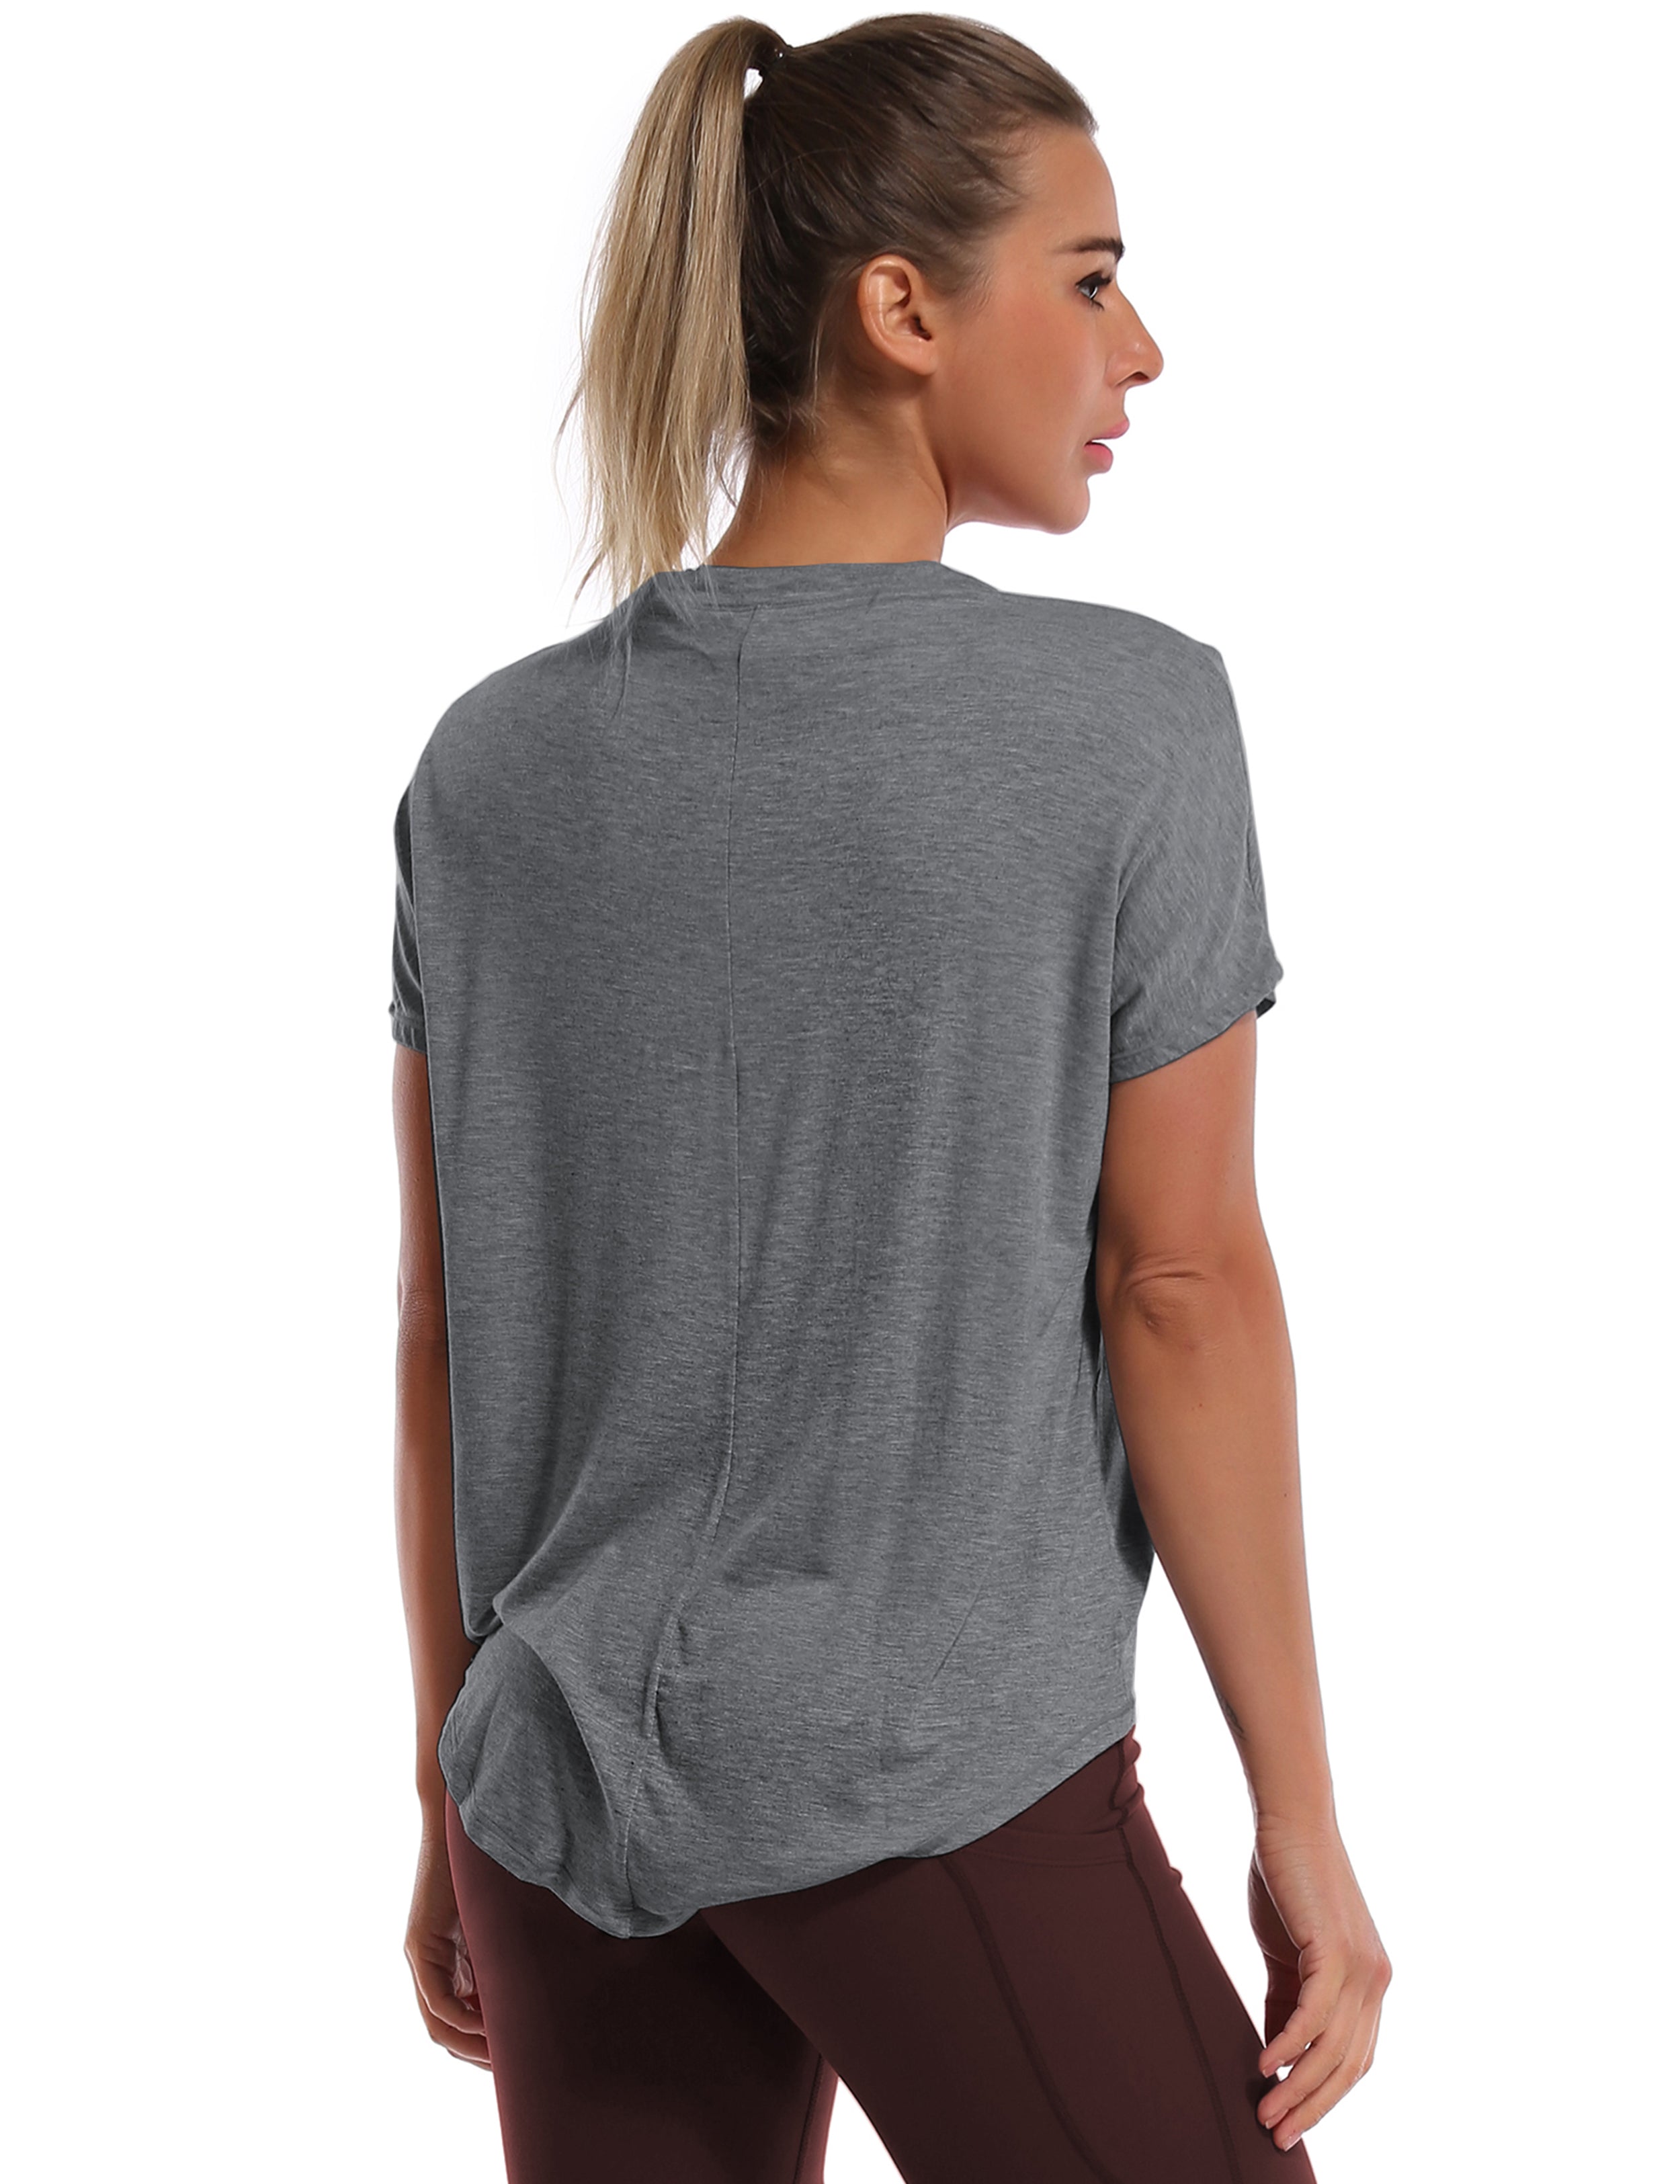 Hip Length Short Sleeve Shirt heathercharcoal 93%Modal/7%Spandex Designed for Pilates Classic Fit, Hip Length An easy fit that floats away from your body Sits below the waistband for moderate, everyday coverage Lightweight, elastic, strong fabric for moisture absorption and perspiration, sports and fitness clothing.